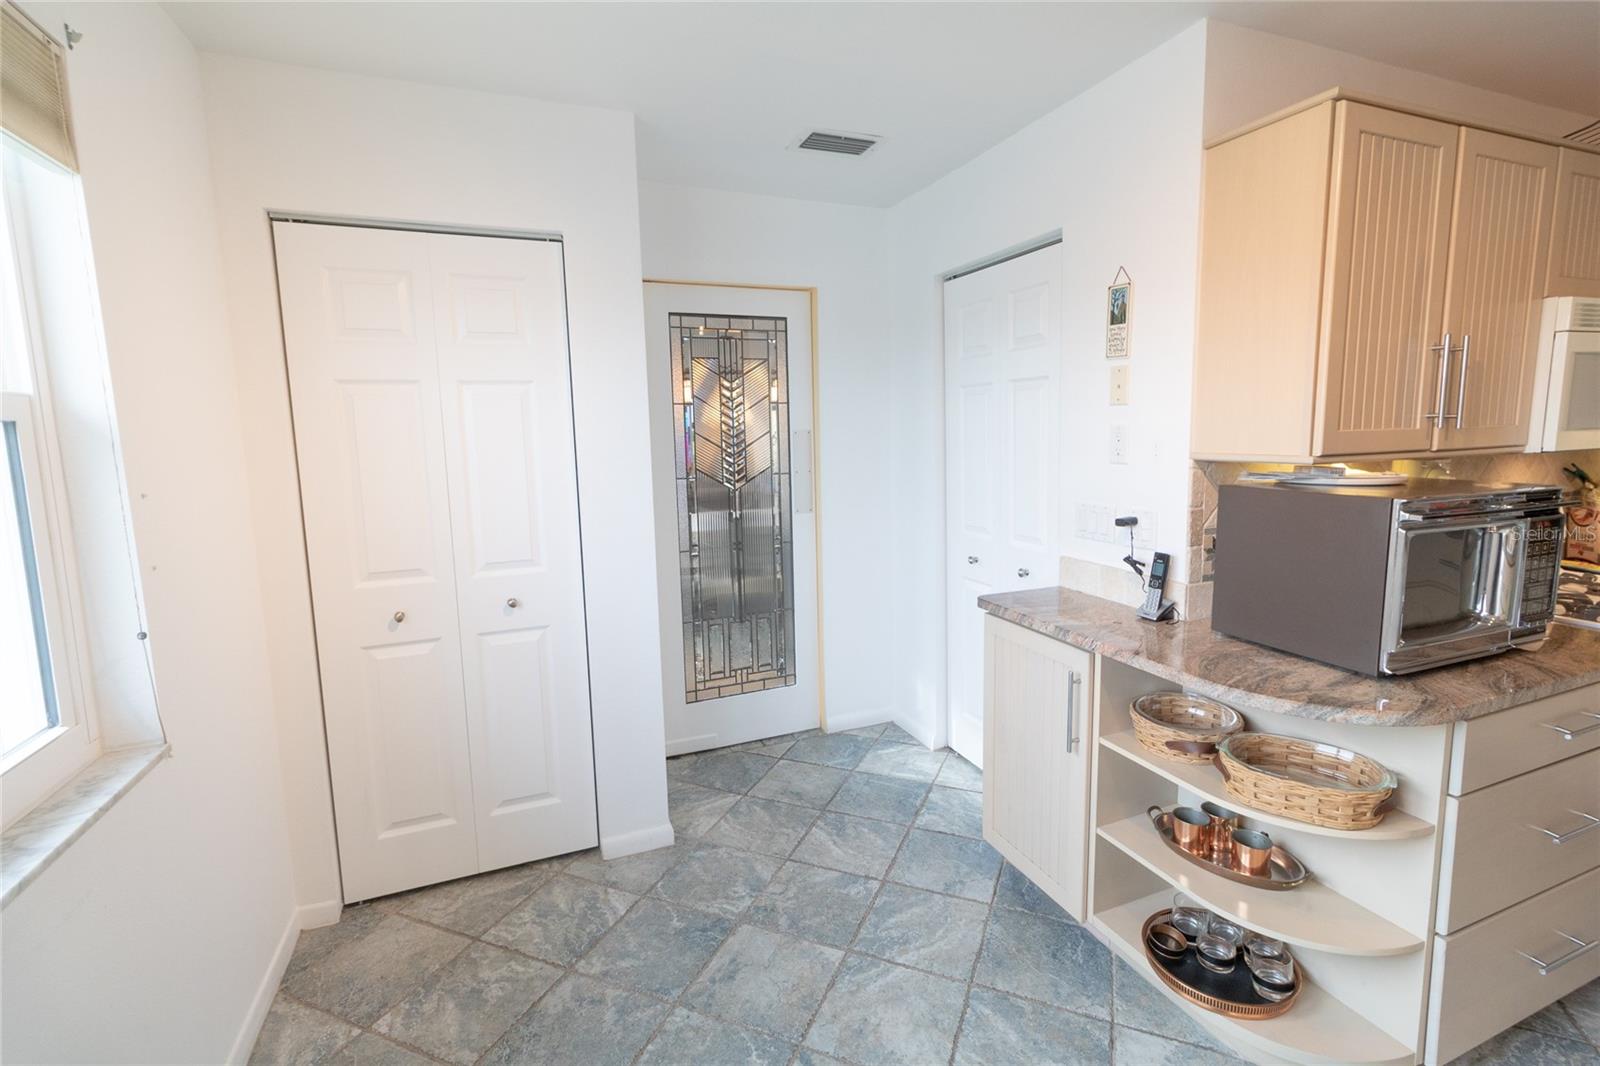 Kitchen Area with Closet Pantry & Walk-in Pantry with Washer & Dryer!